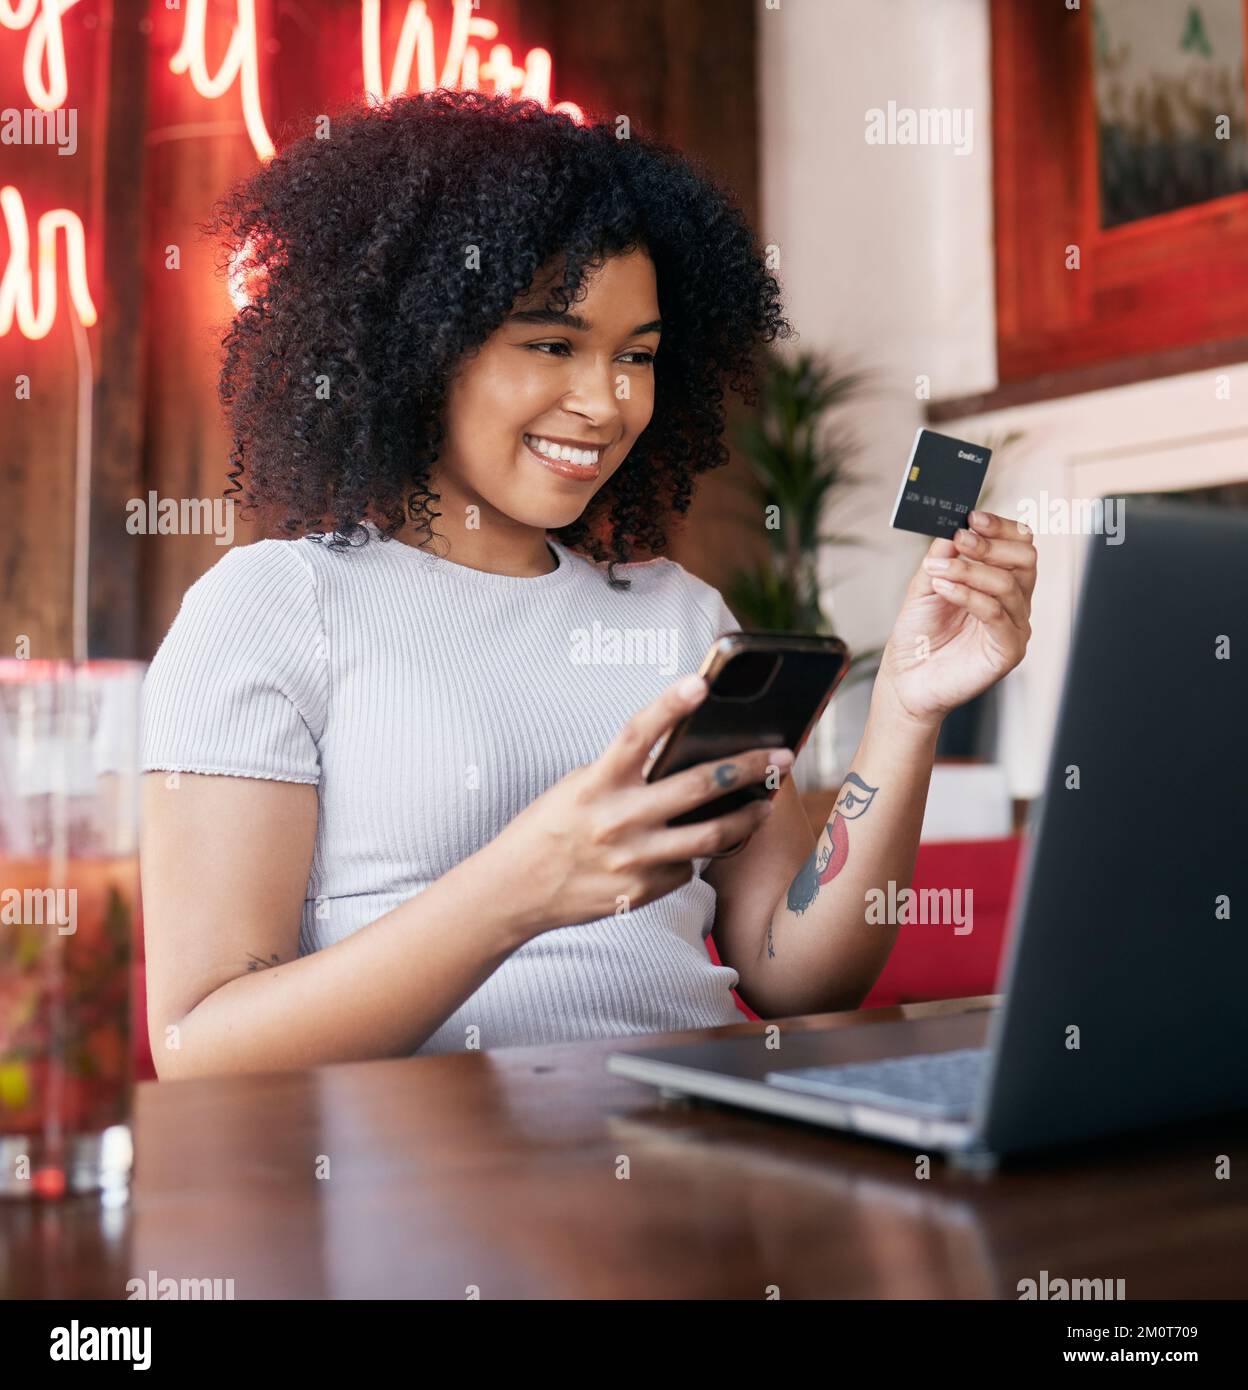 Credit card, phone and woman on laptop in cafe online shopping, ecommerce website payment for fashion sale. Black woman, retail customer and Stock Photo